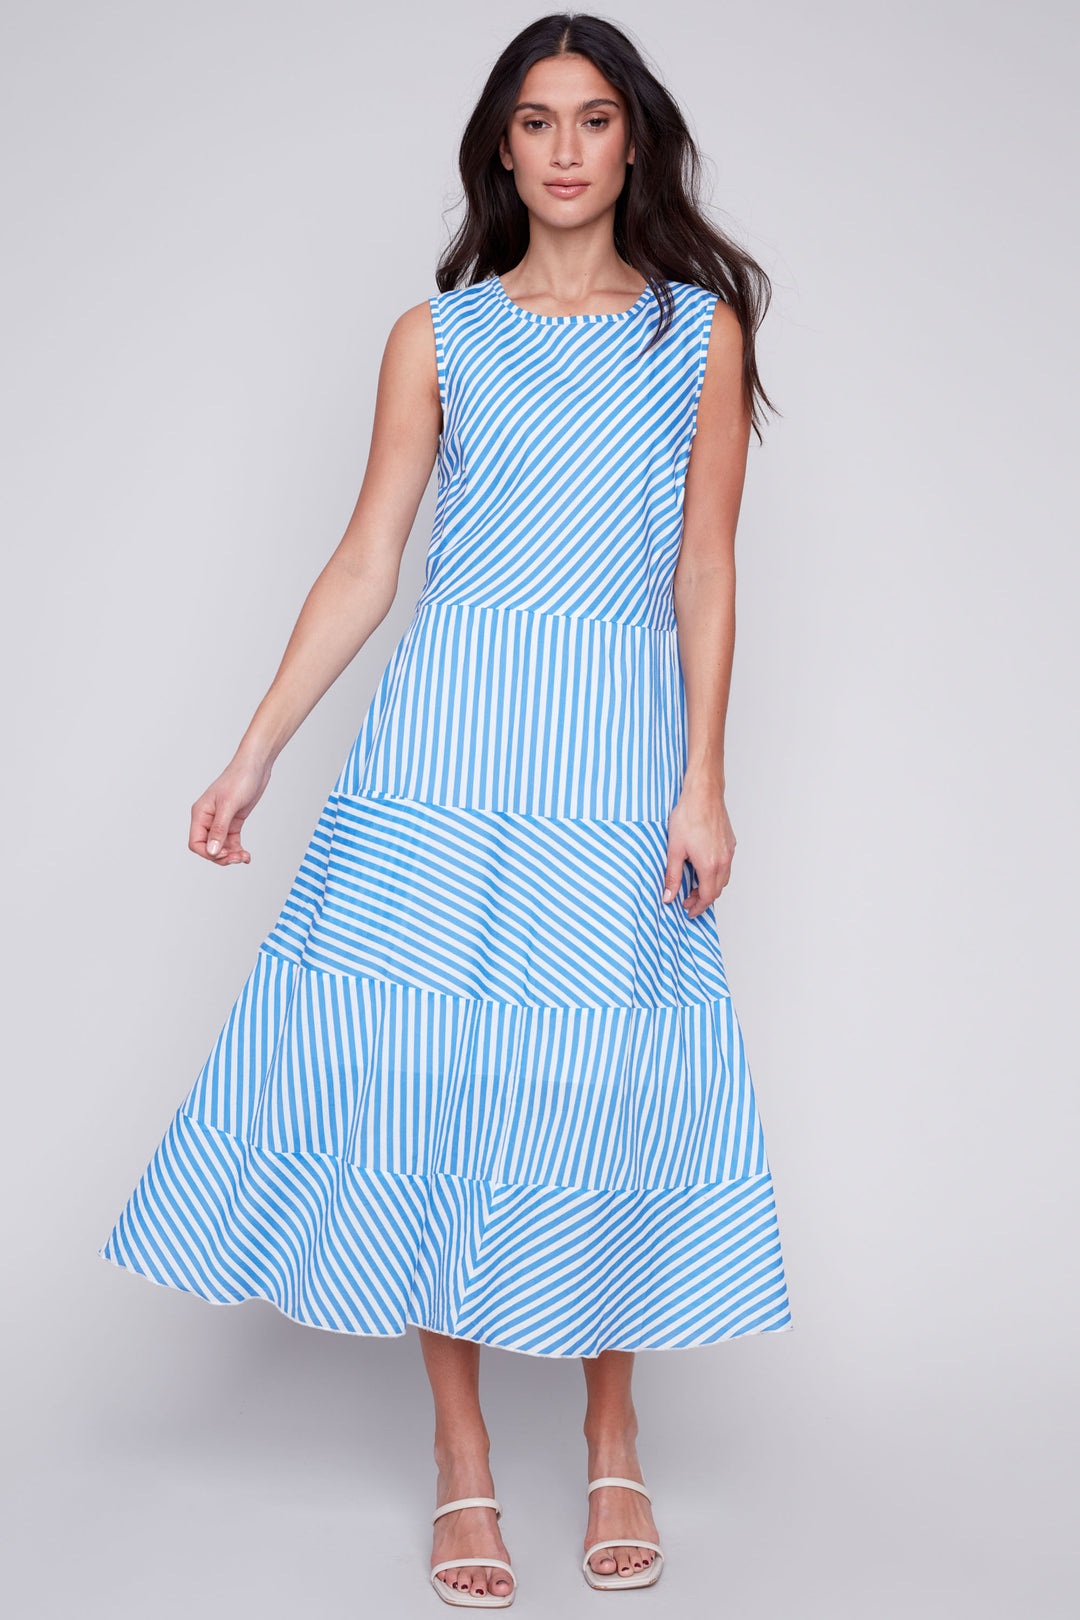 Charlie B Spring 2024 Made of all cotton, this dress boasts a classic skirt hem and convenient pockets. The sleeveless design and captivating stripe pattern make this free-flowing dress a must!